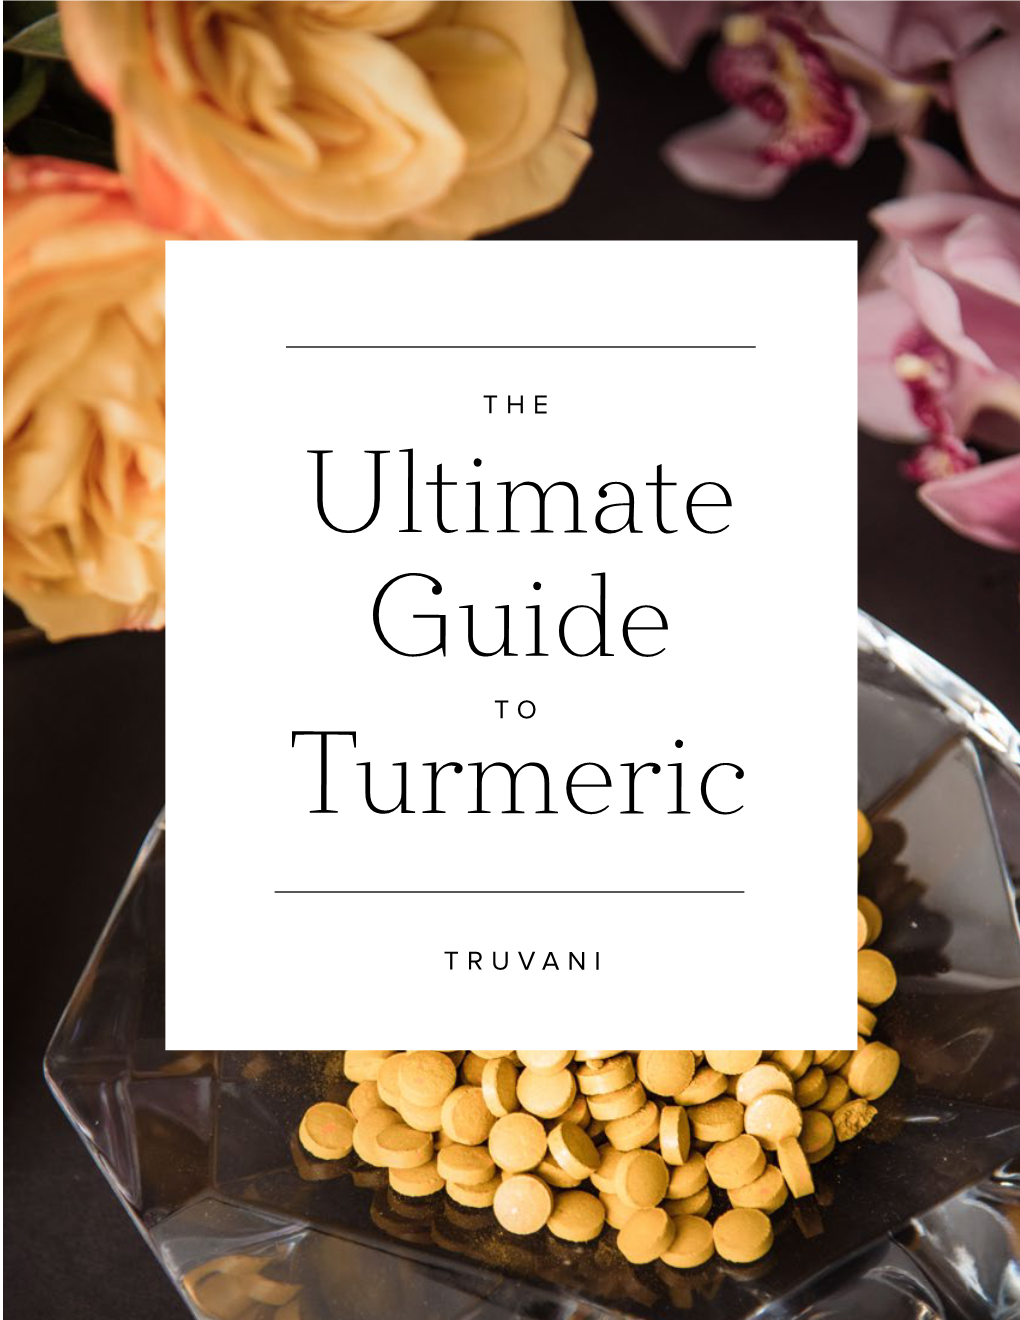 THE Ultimate Guide to Turmeric